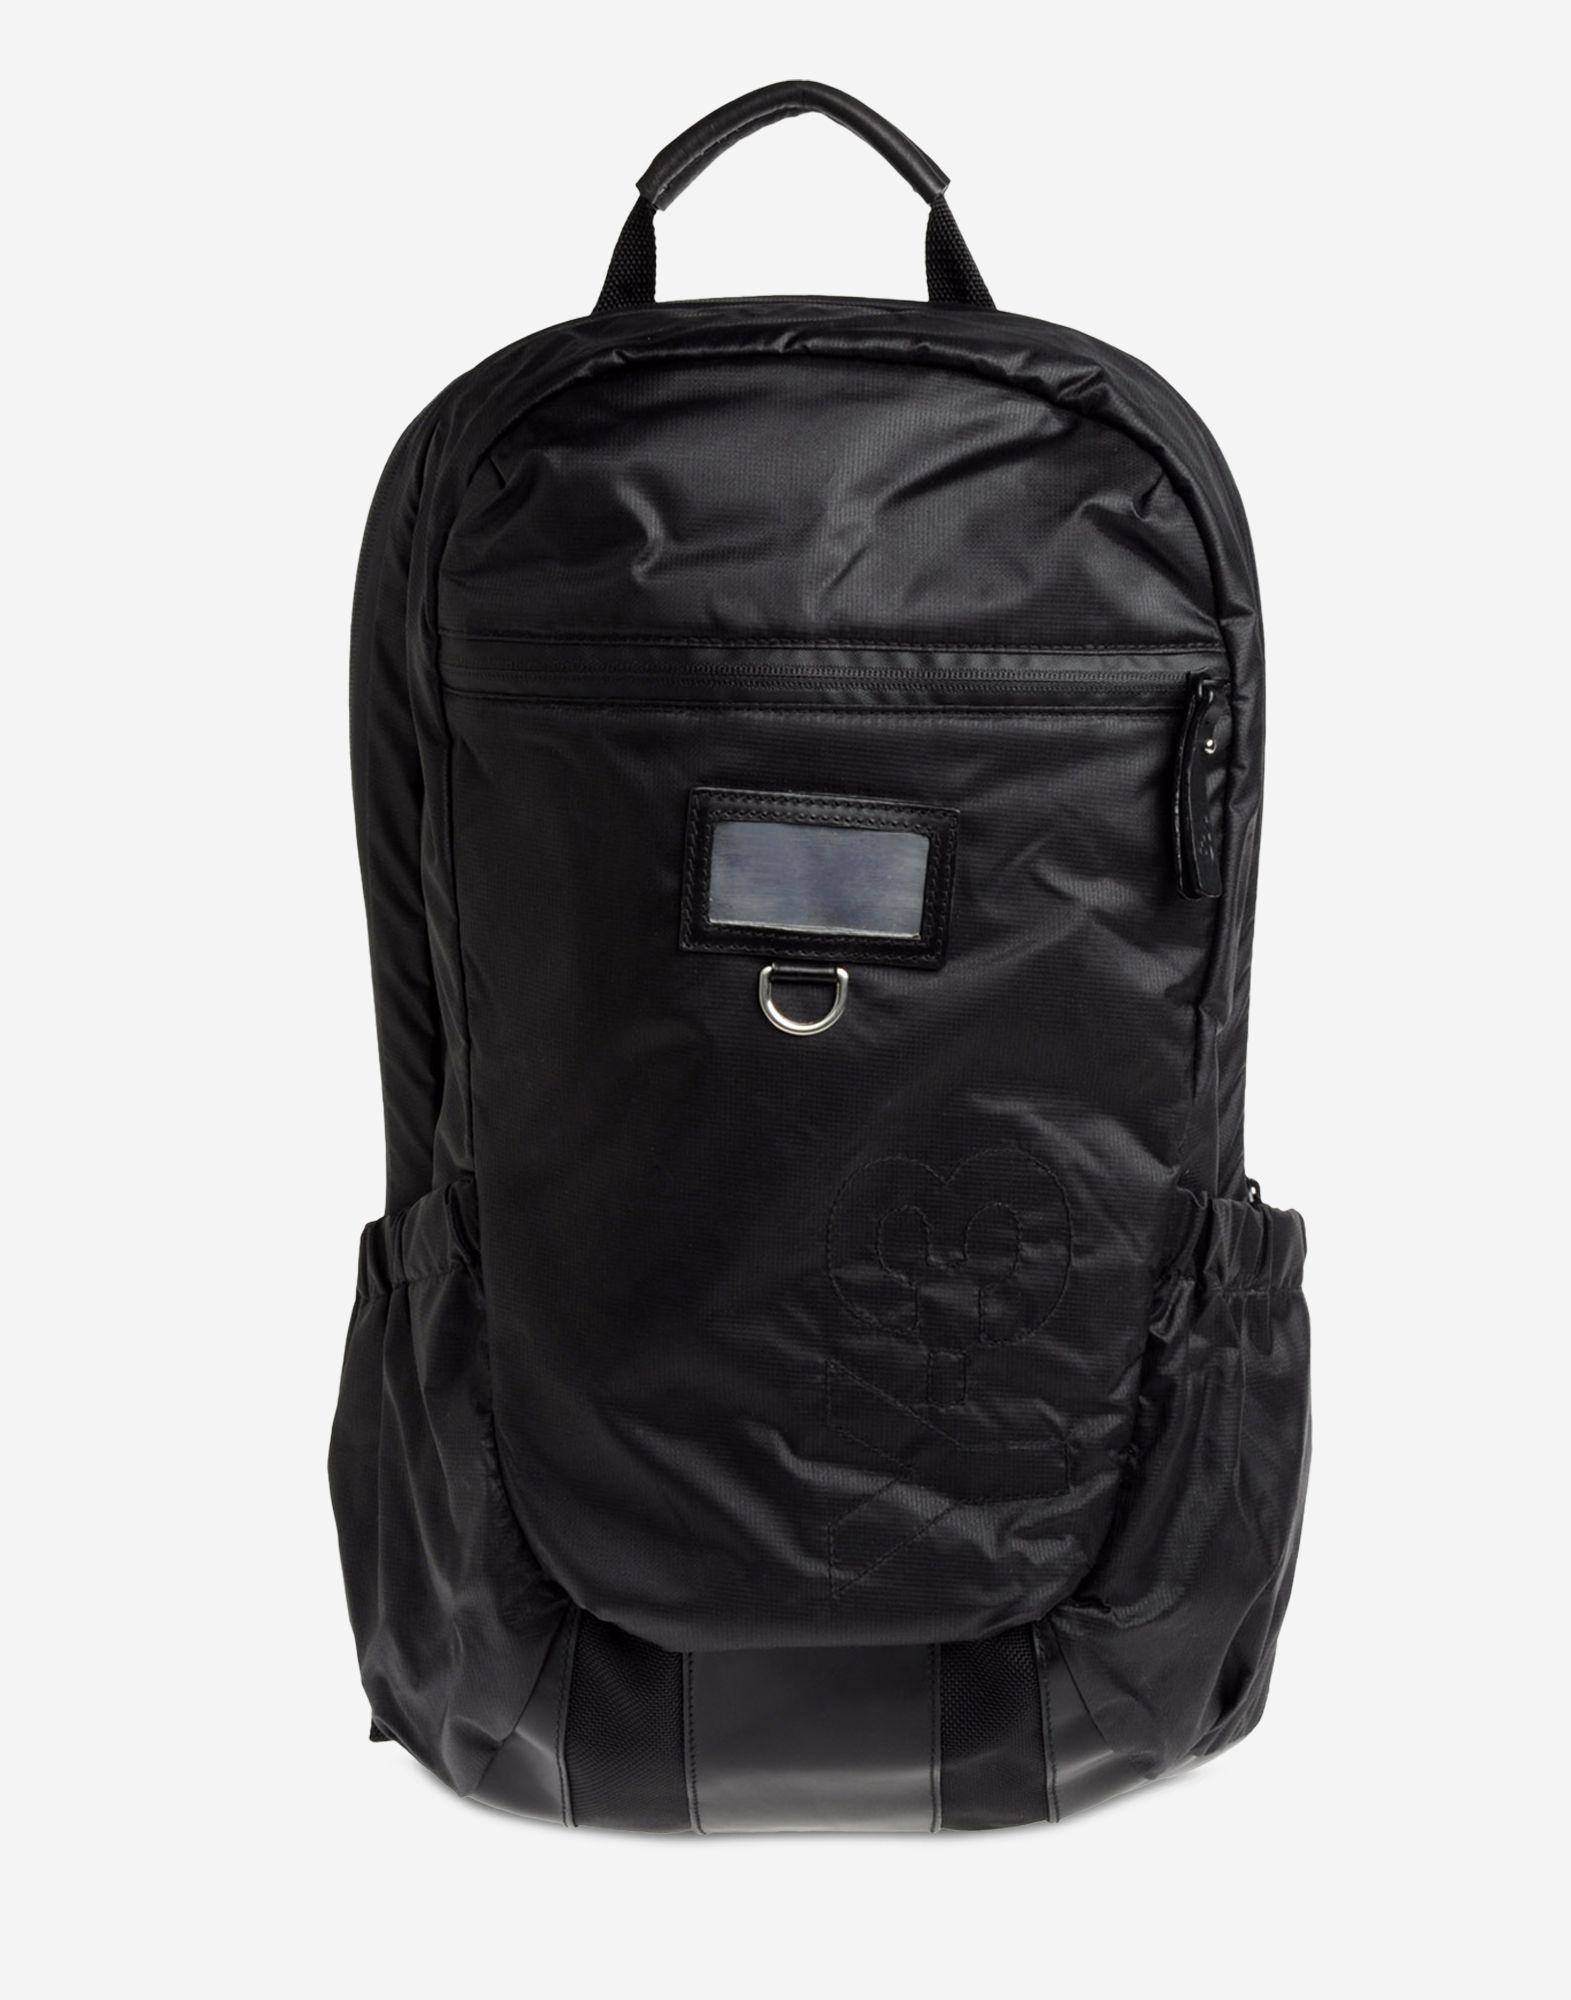 Y 3 Mobility Backpack for Women | Adidas Y-3 Official Store